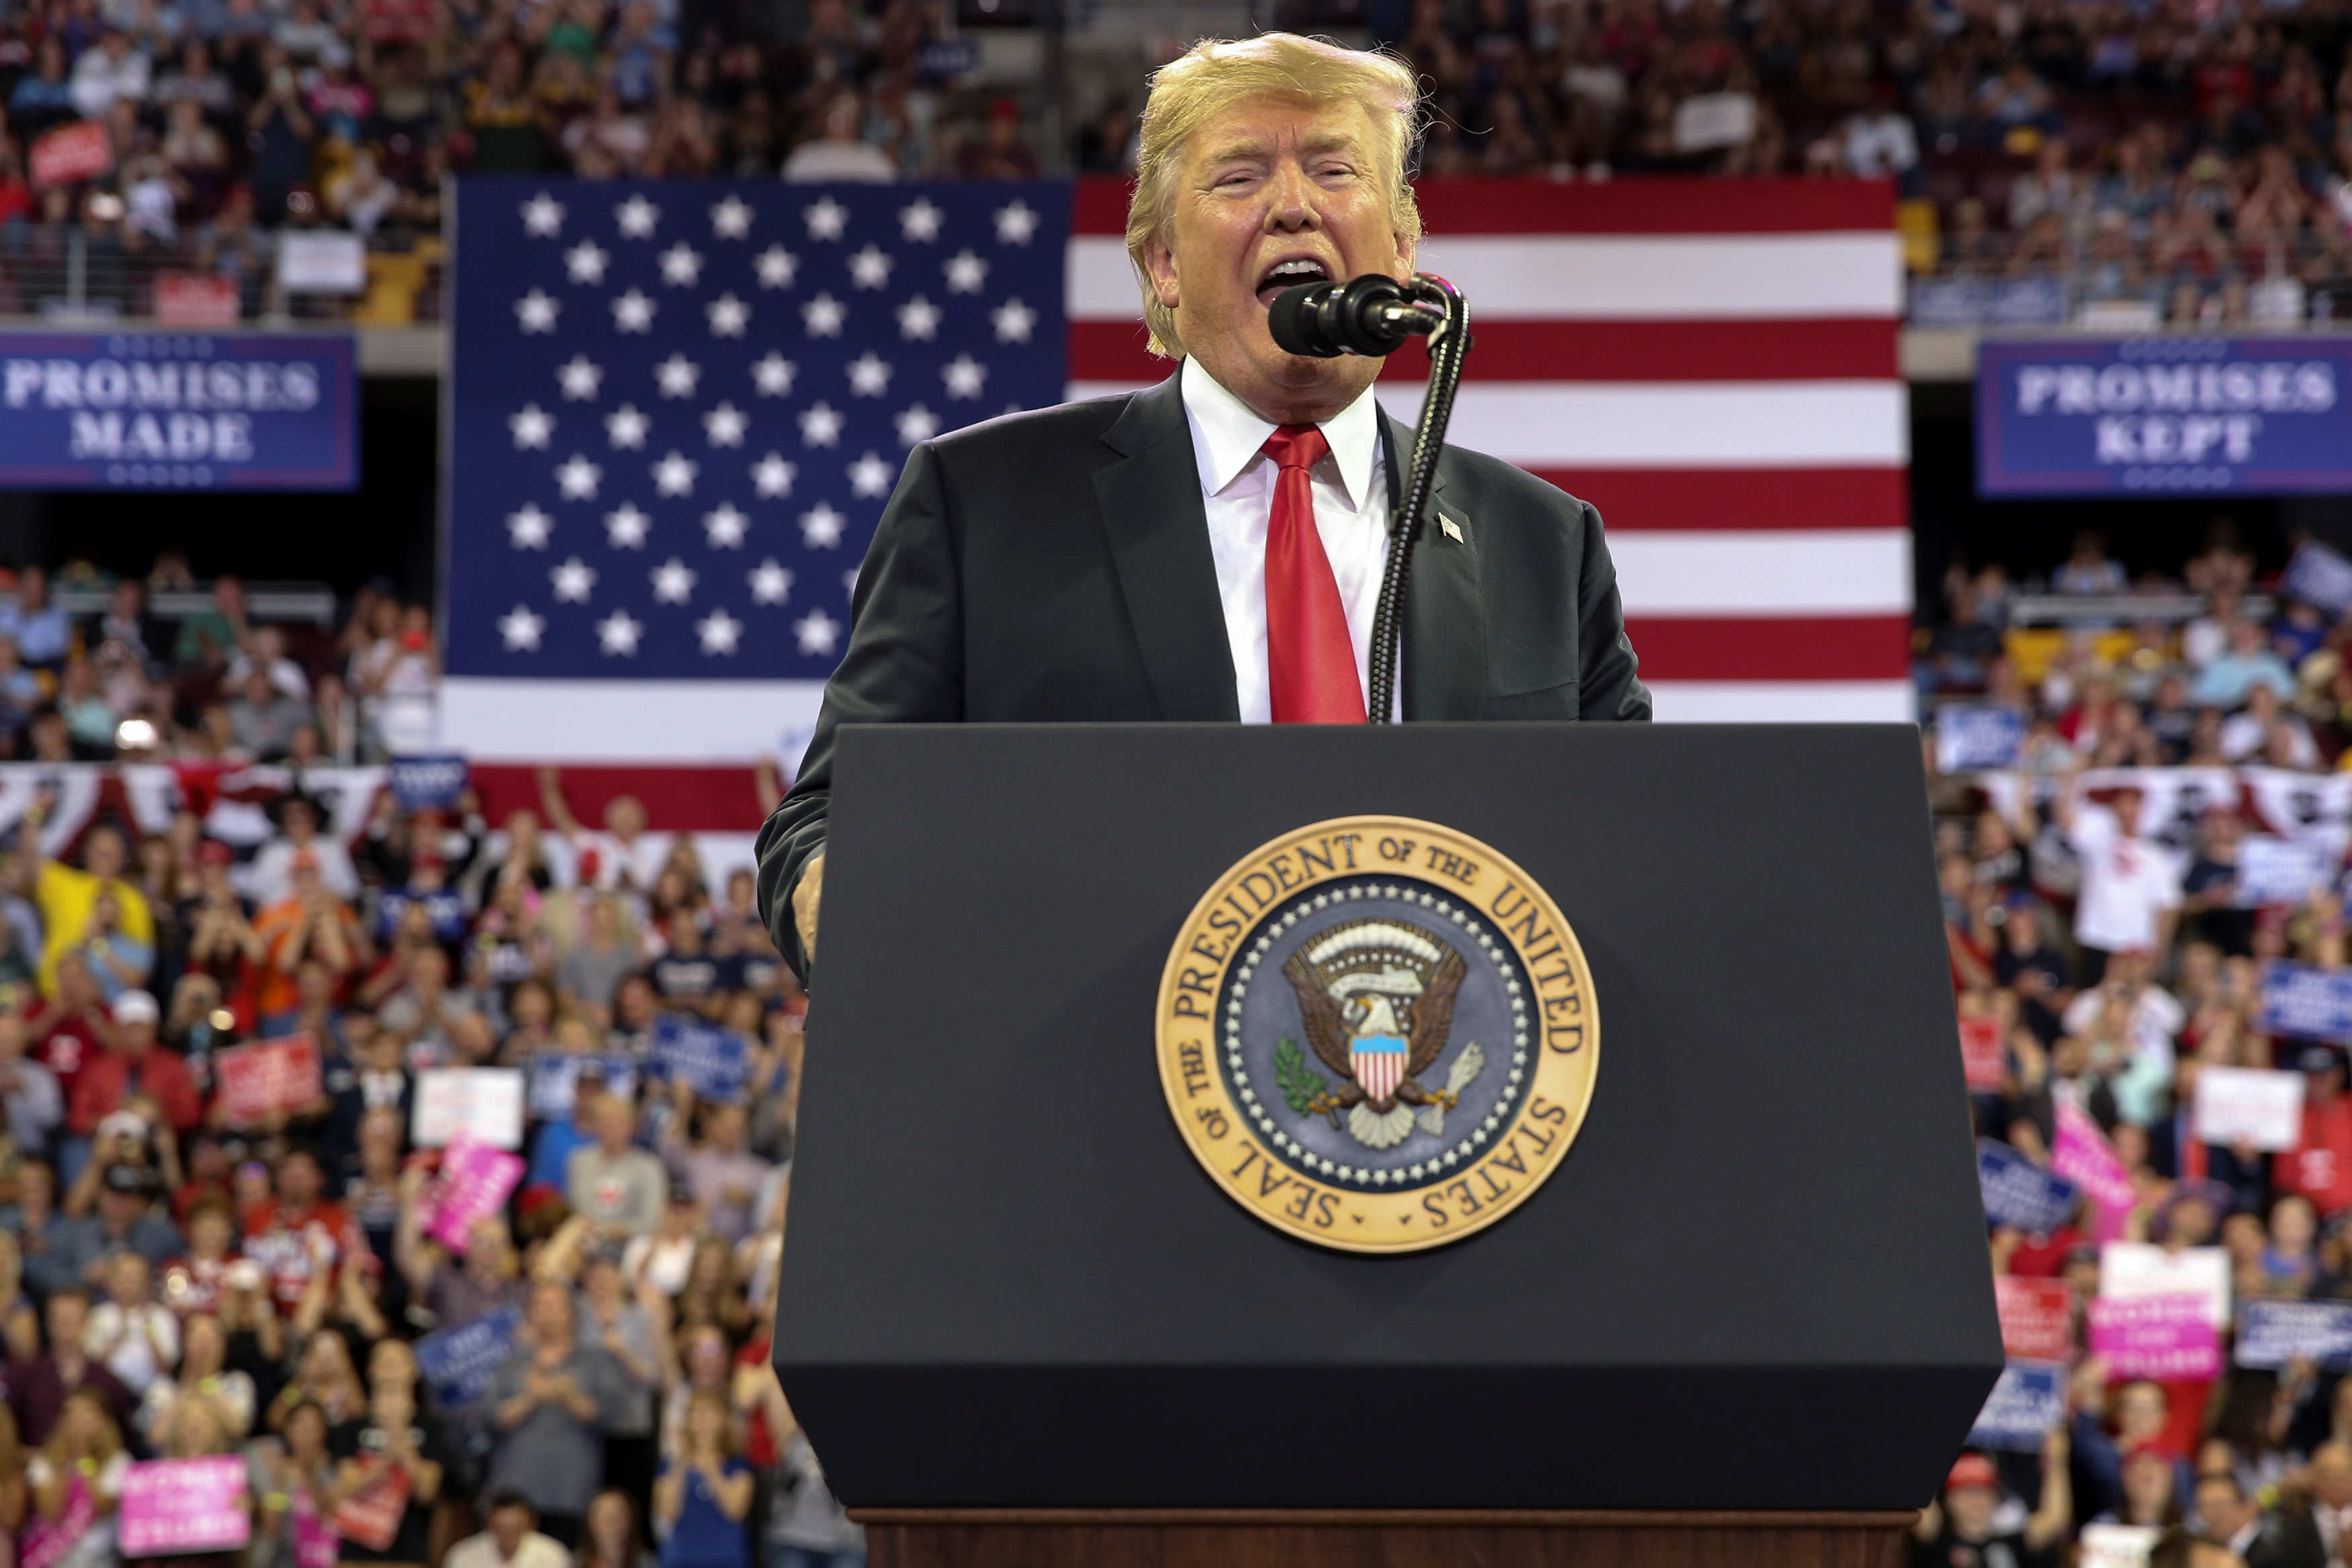 President Donald Trump at a rally with supporters in Duluth, Minnesota on June 20, 2018. (Jonathan Ernst—Reuters)